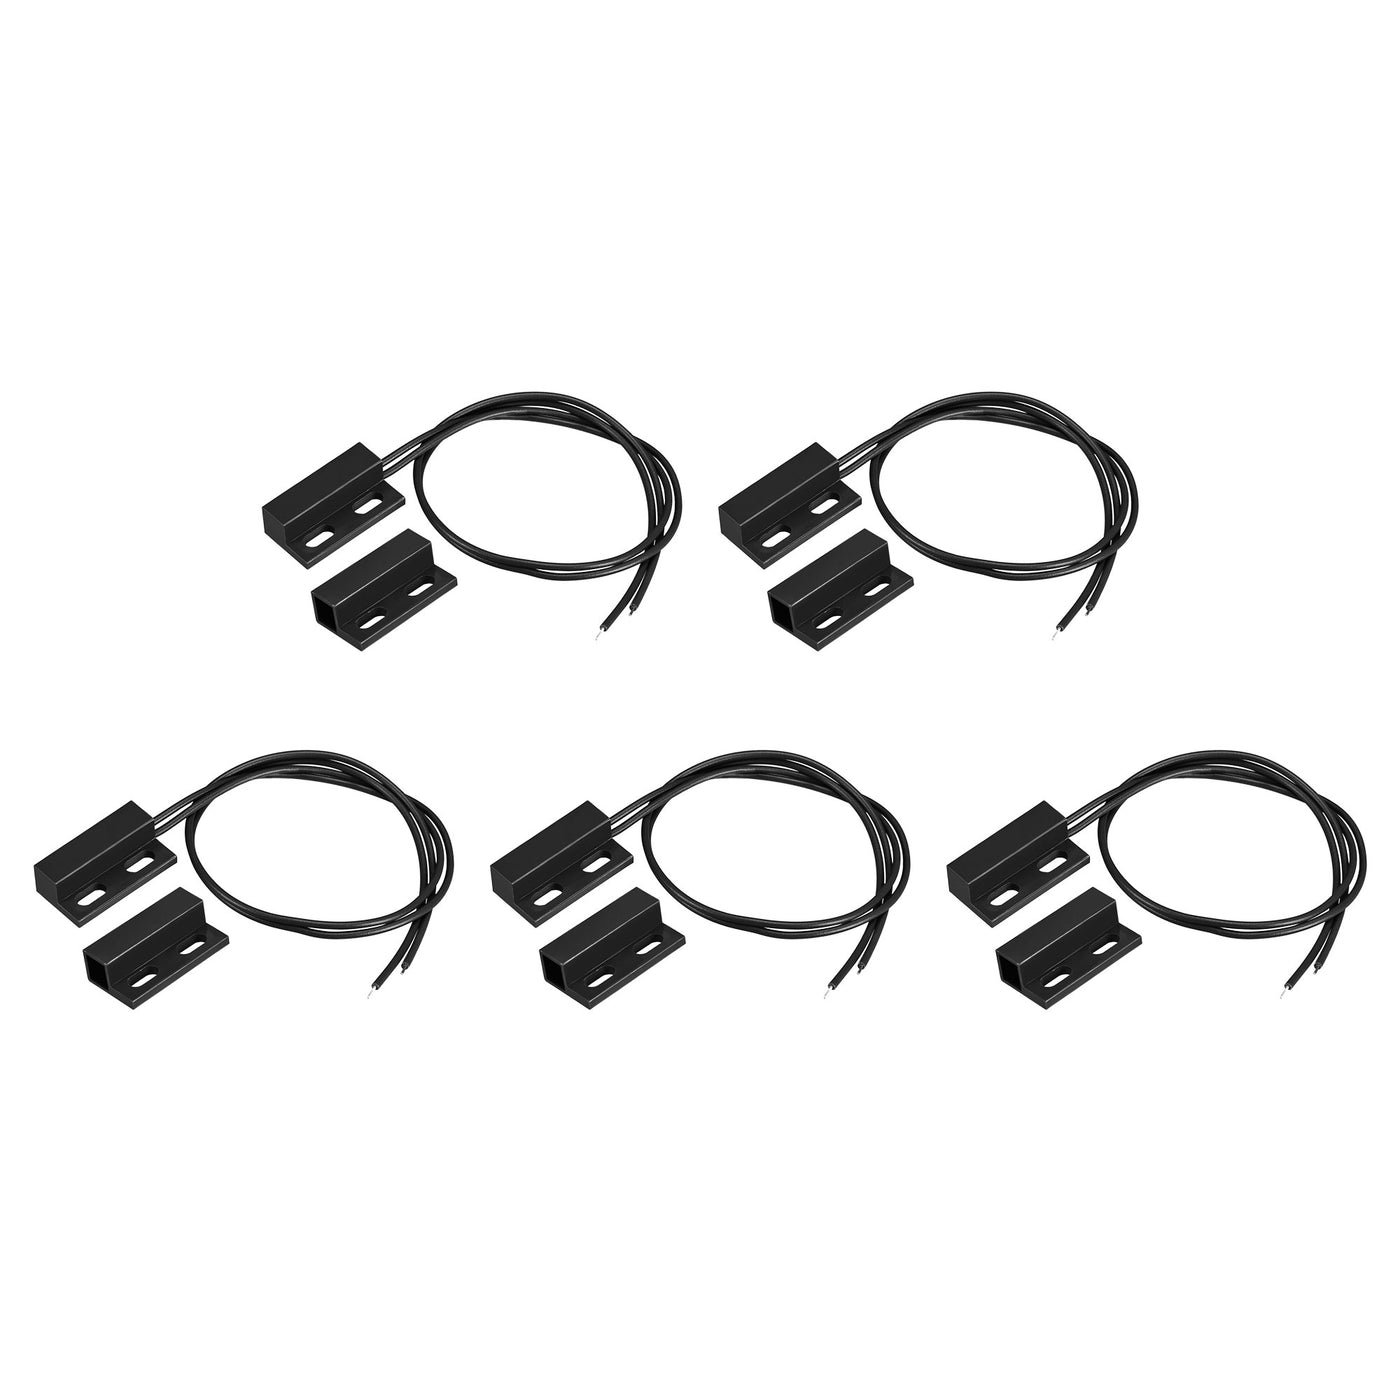 uxcell Uxcell Wired Door Contact Sensor NC Surface Mount Magnetic Reed Switch Black 5 Pcs